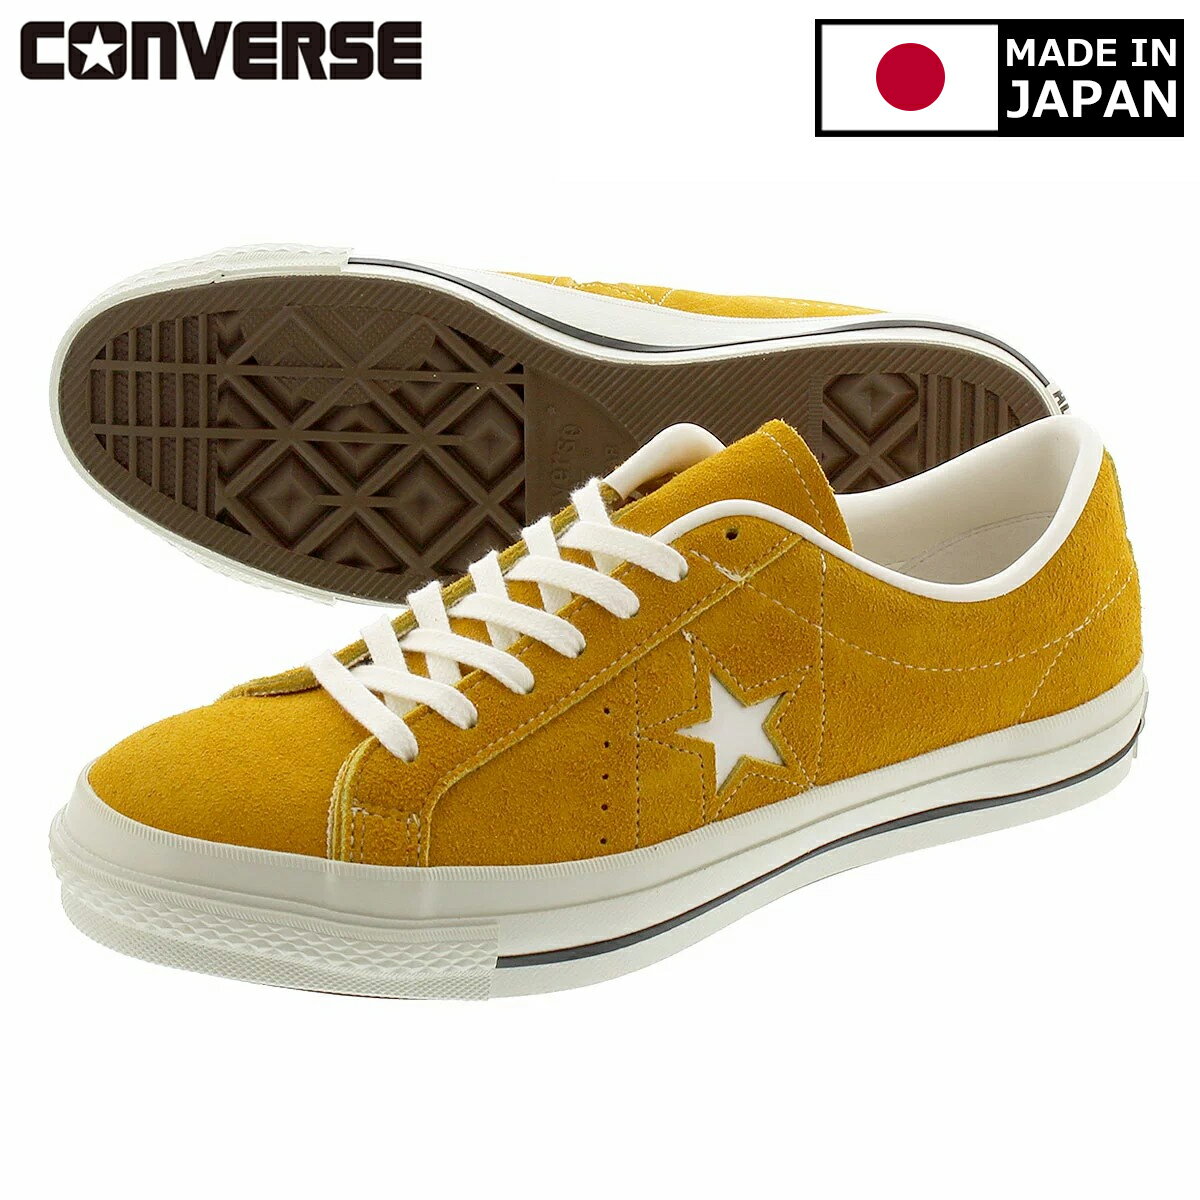 CONVERSE ONE STAR J SUEDE 【MADE IN JAPAN】【日本製】 コンバース ワンスター J スエード GOLD 35200190